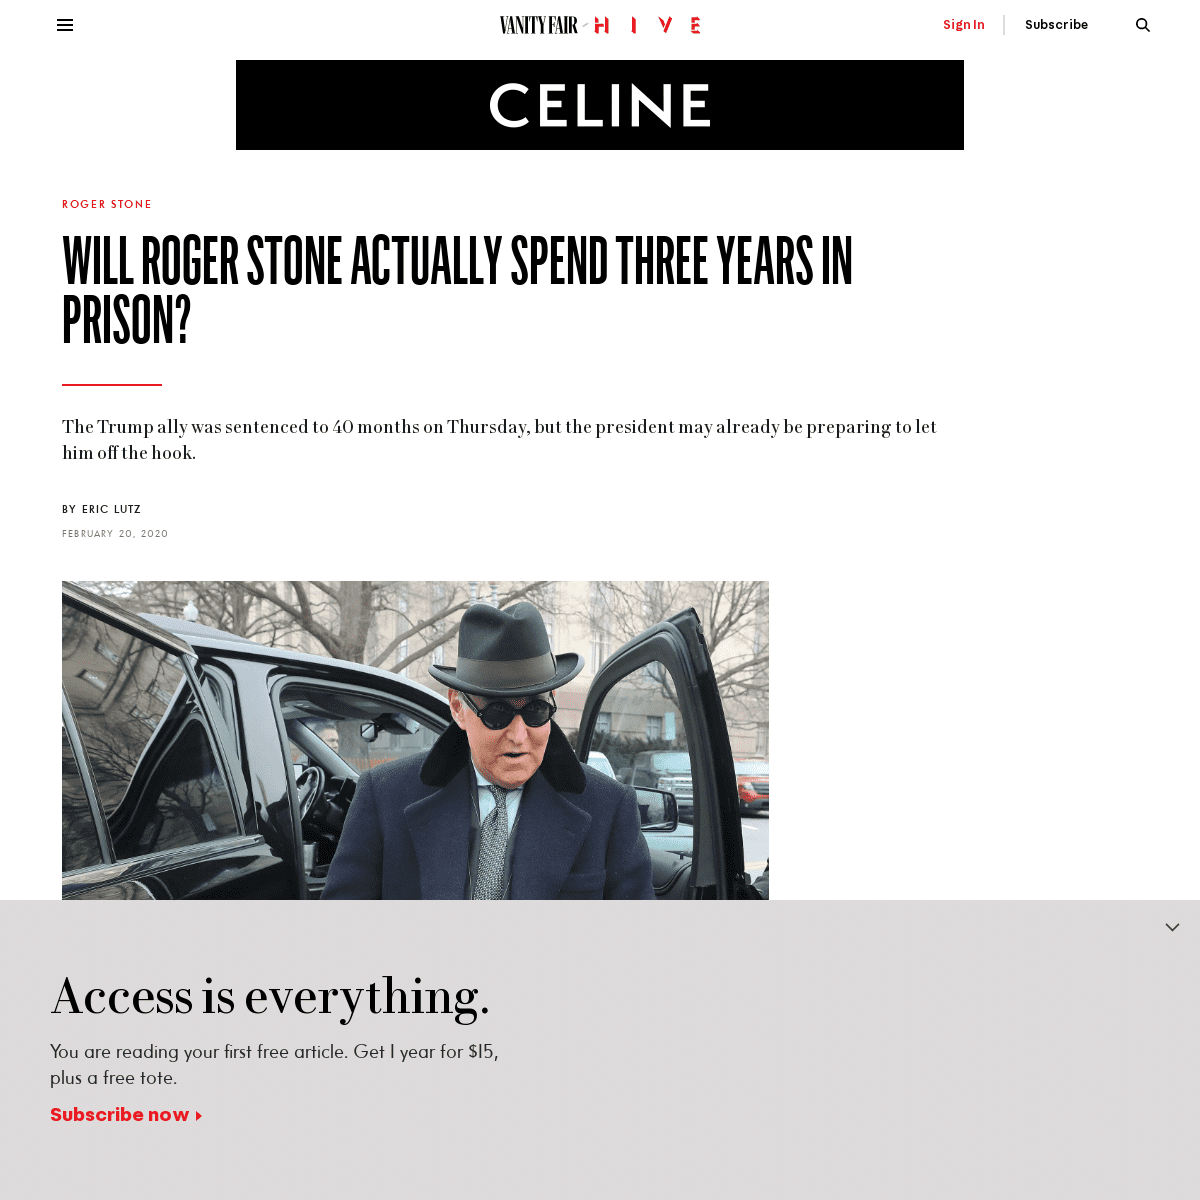 A complete backup of www.vanityfair.com/news/2020/02/will-roger-stone-actually-spend-three-years-in-prison